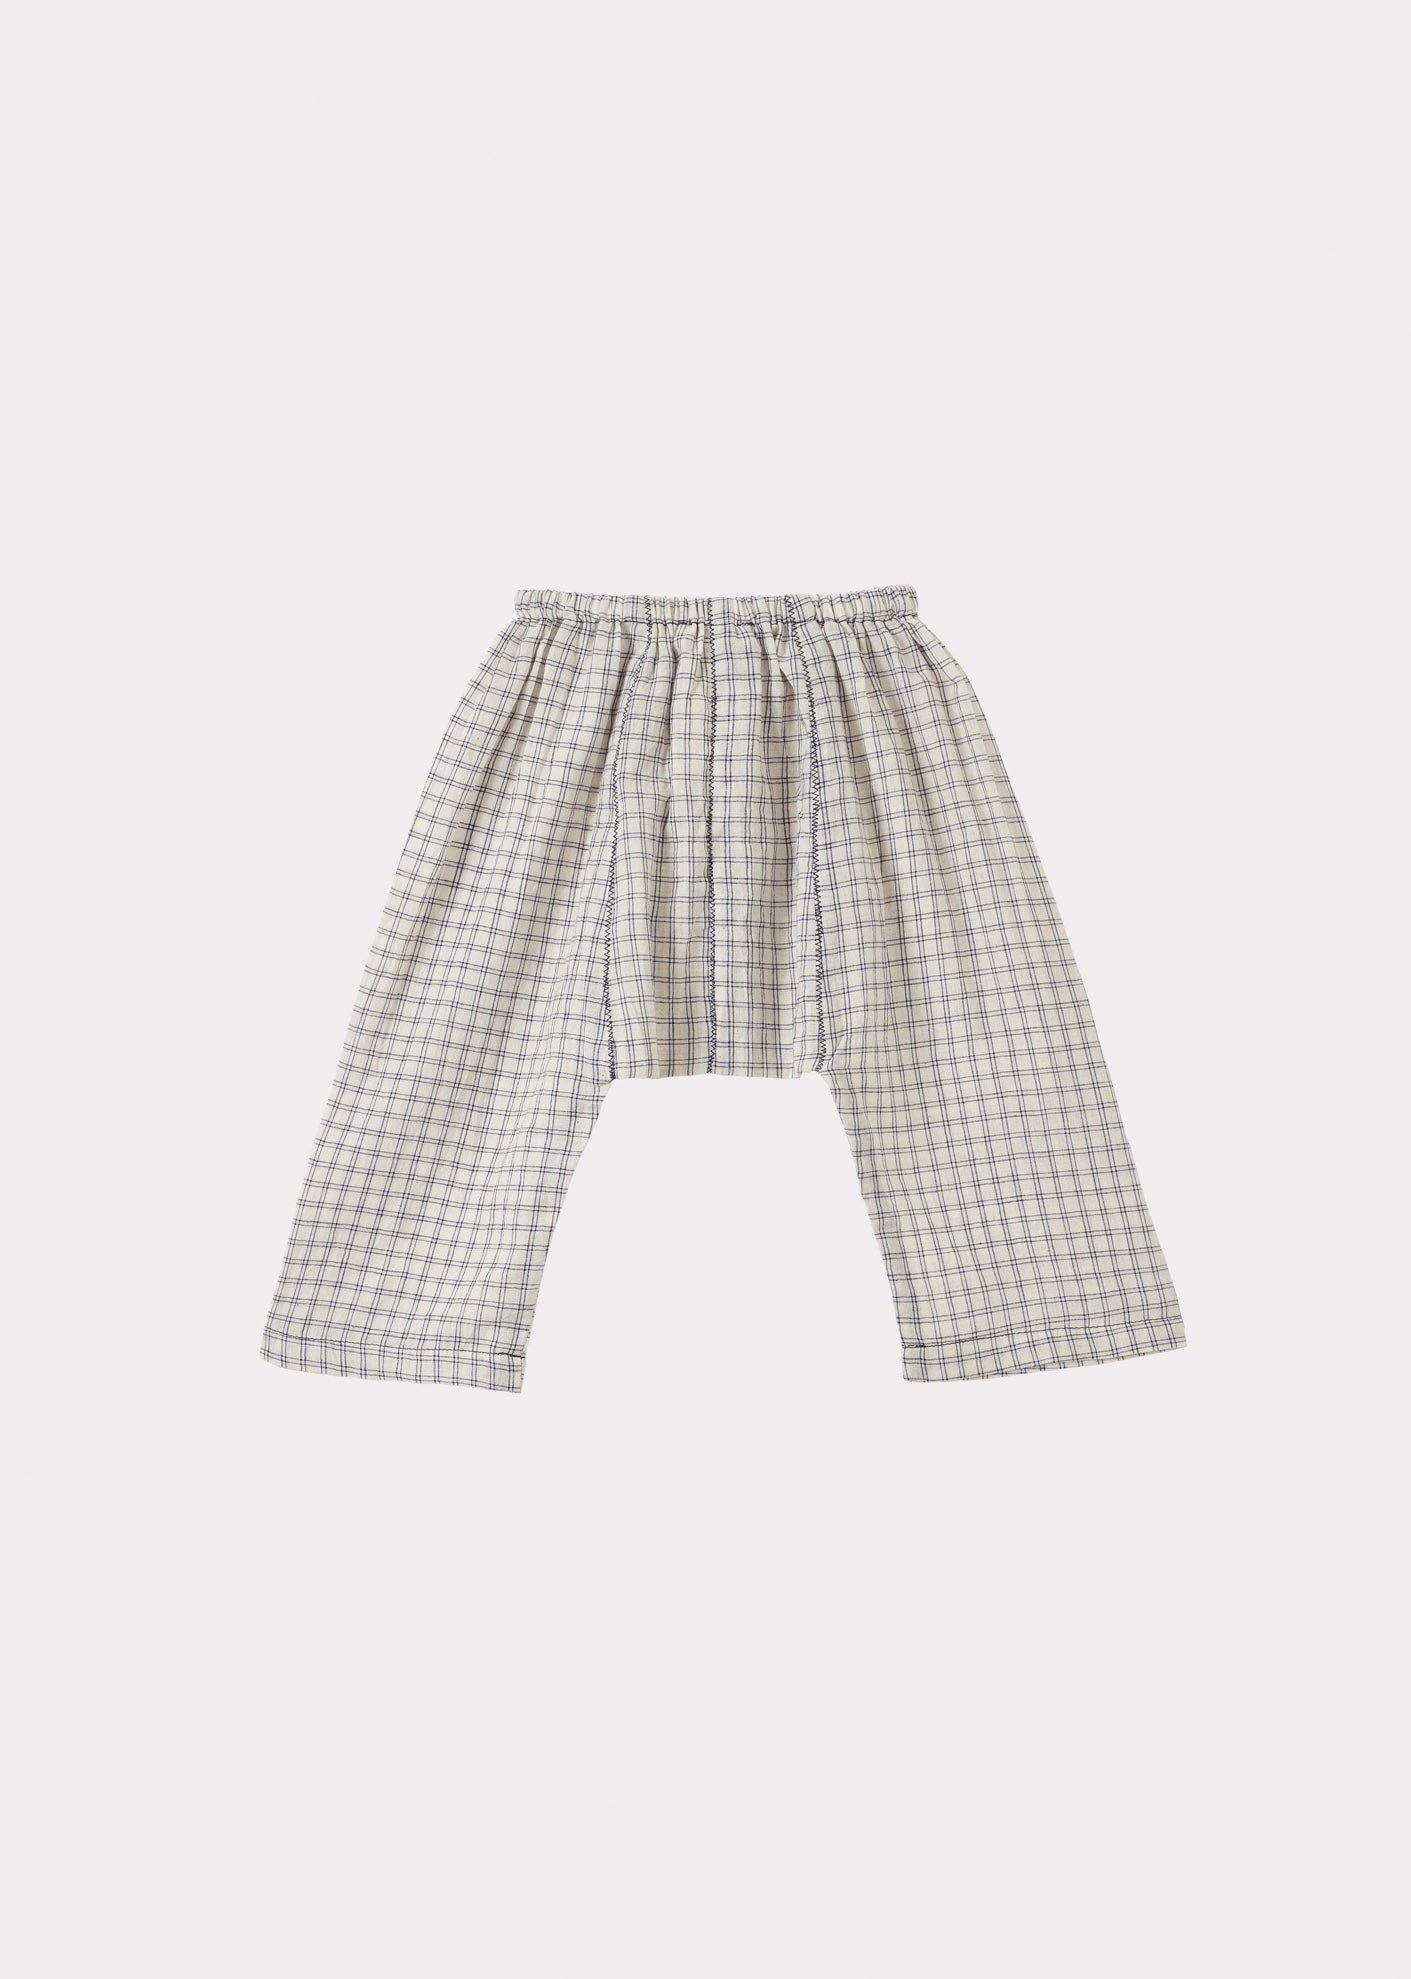 LINUM BABY TROUSERS - WHITE/NAVY CHECK